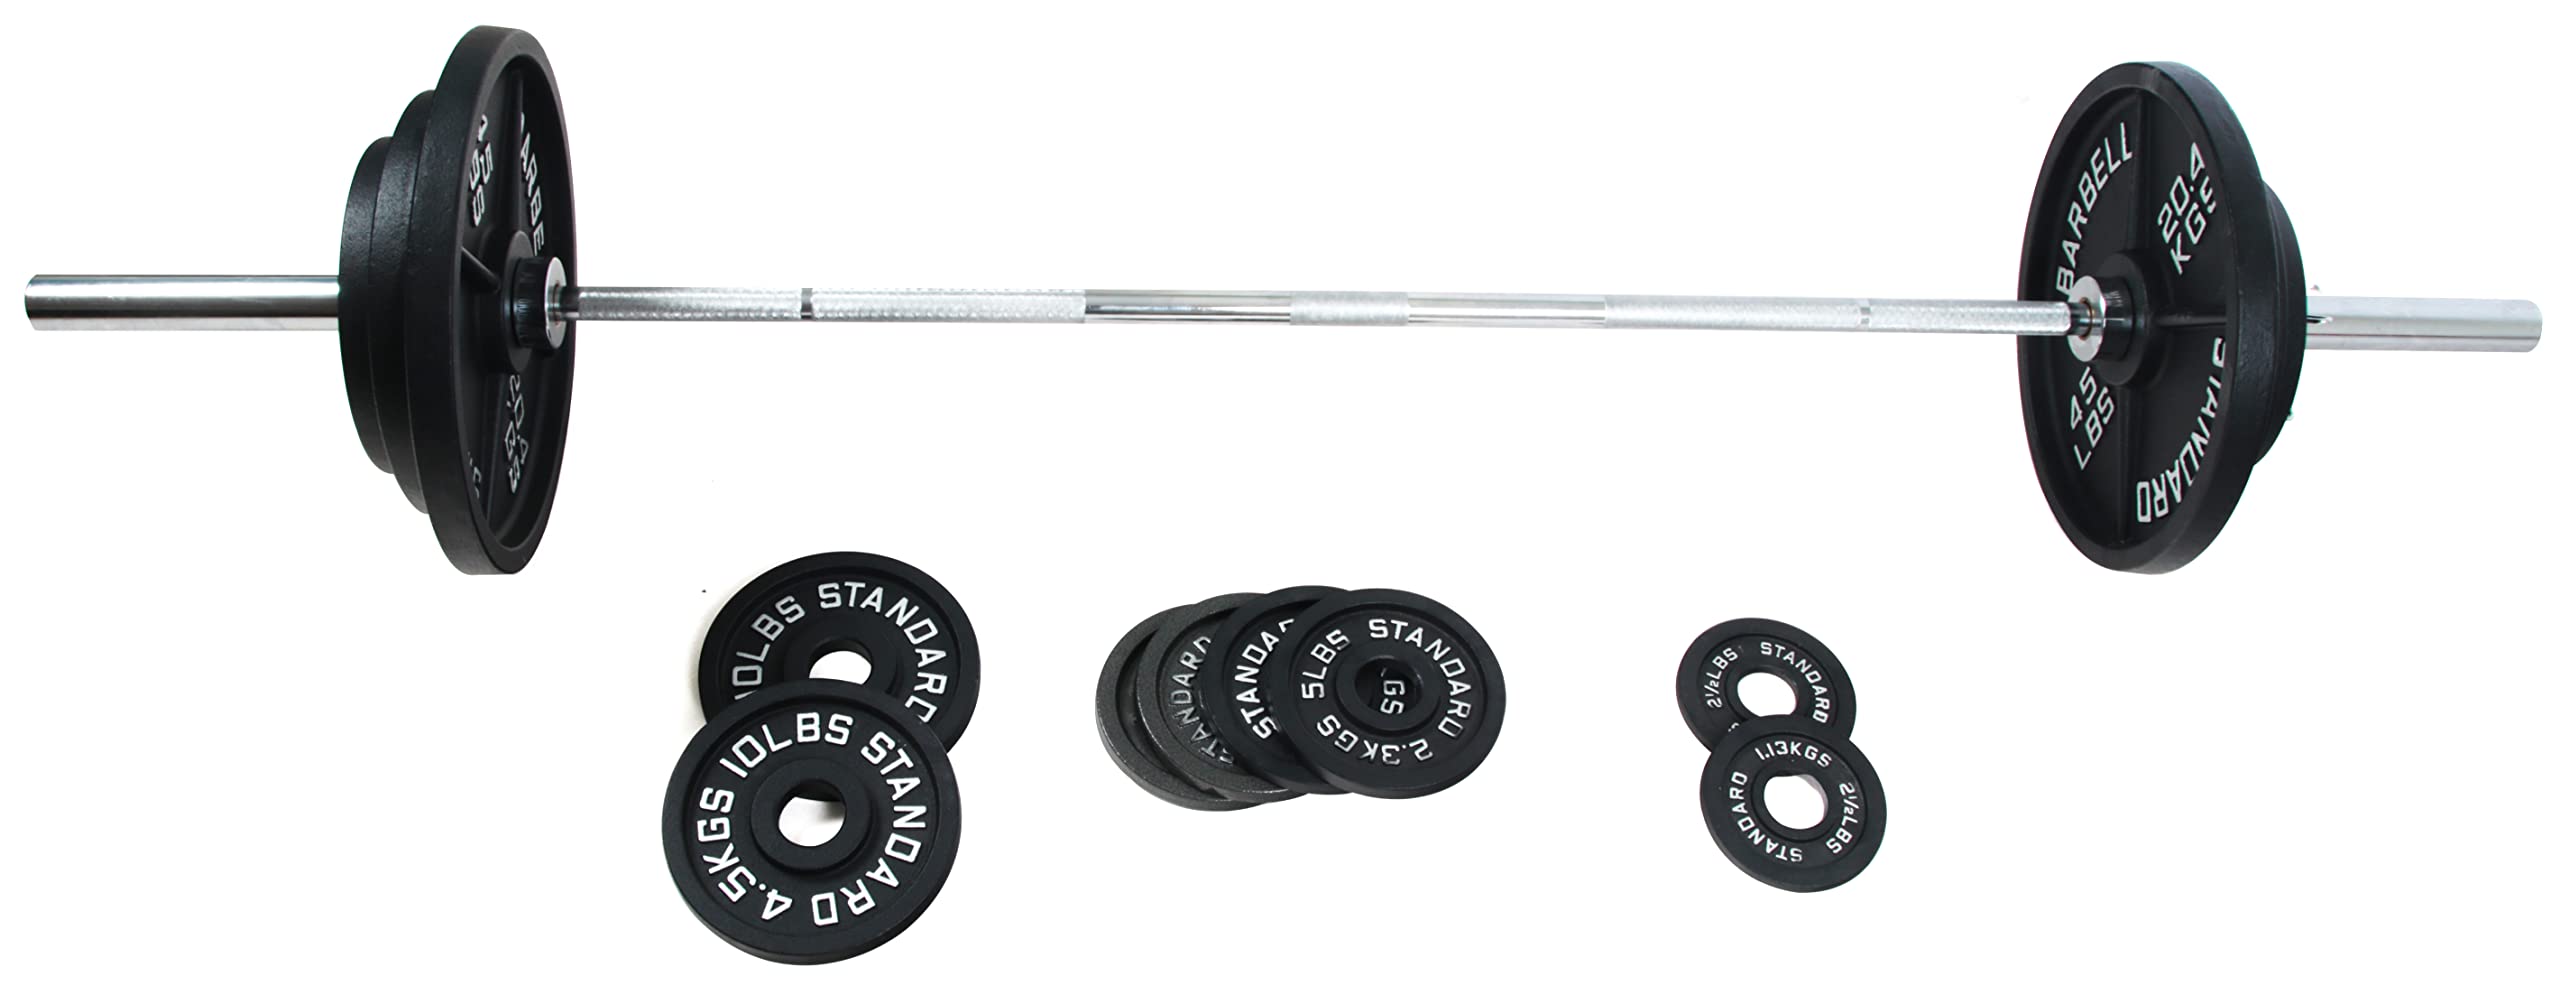 Signature Fitness Cast Iron Olympic Weight Including 7FT Olympic Barbell, 300-Pound Set, Multiple Packages